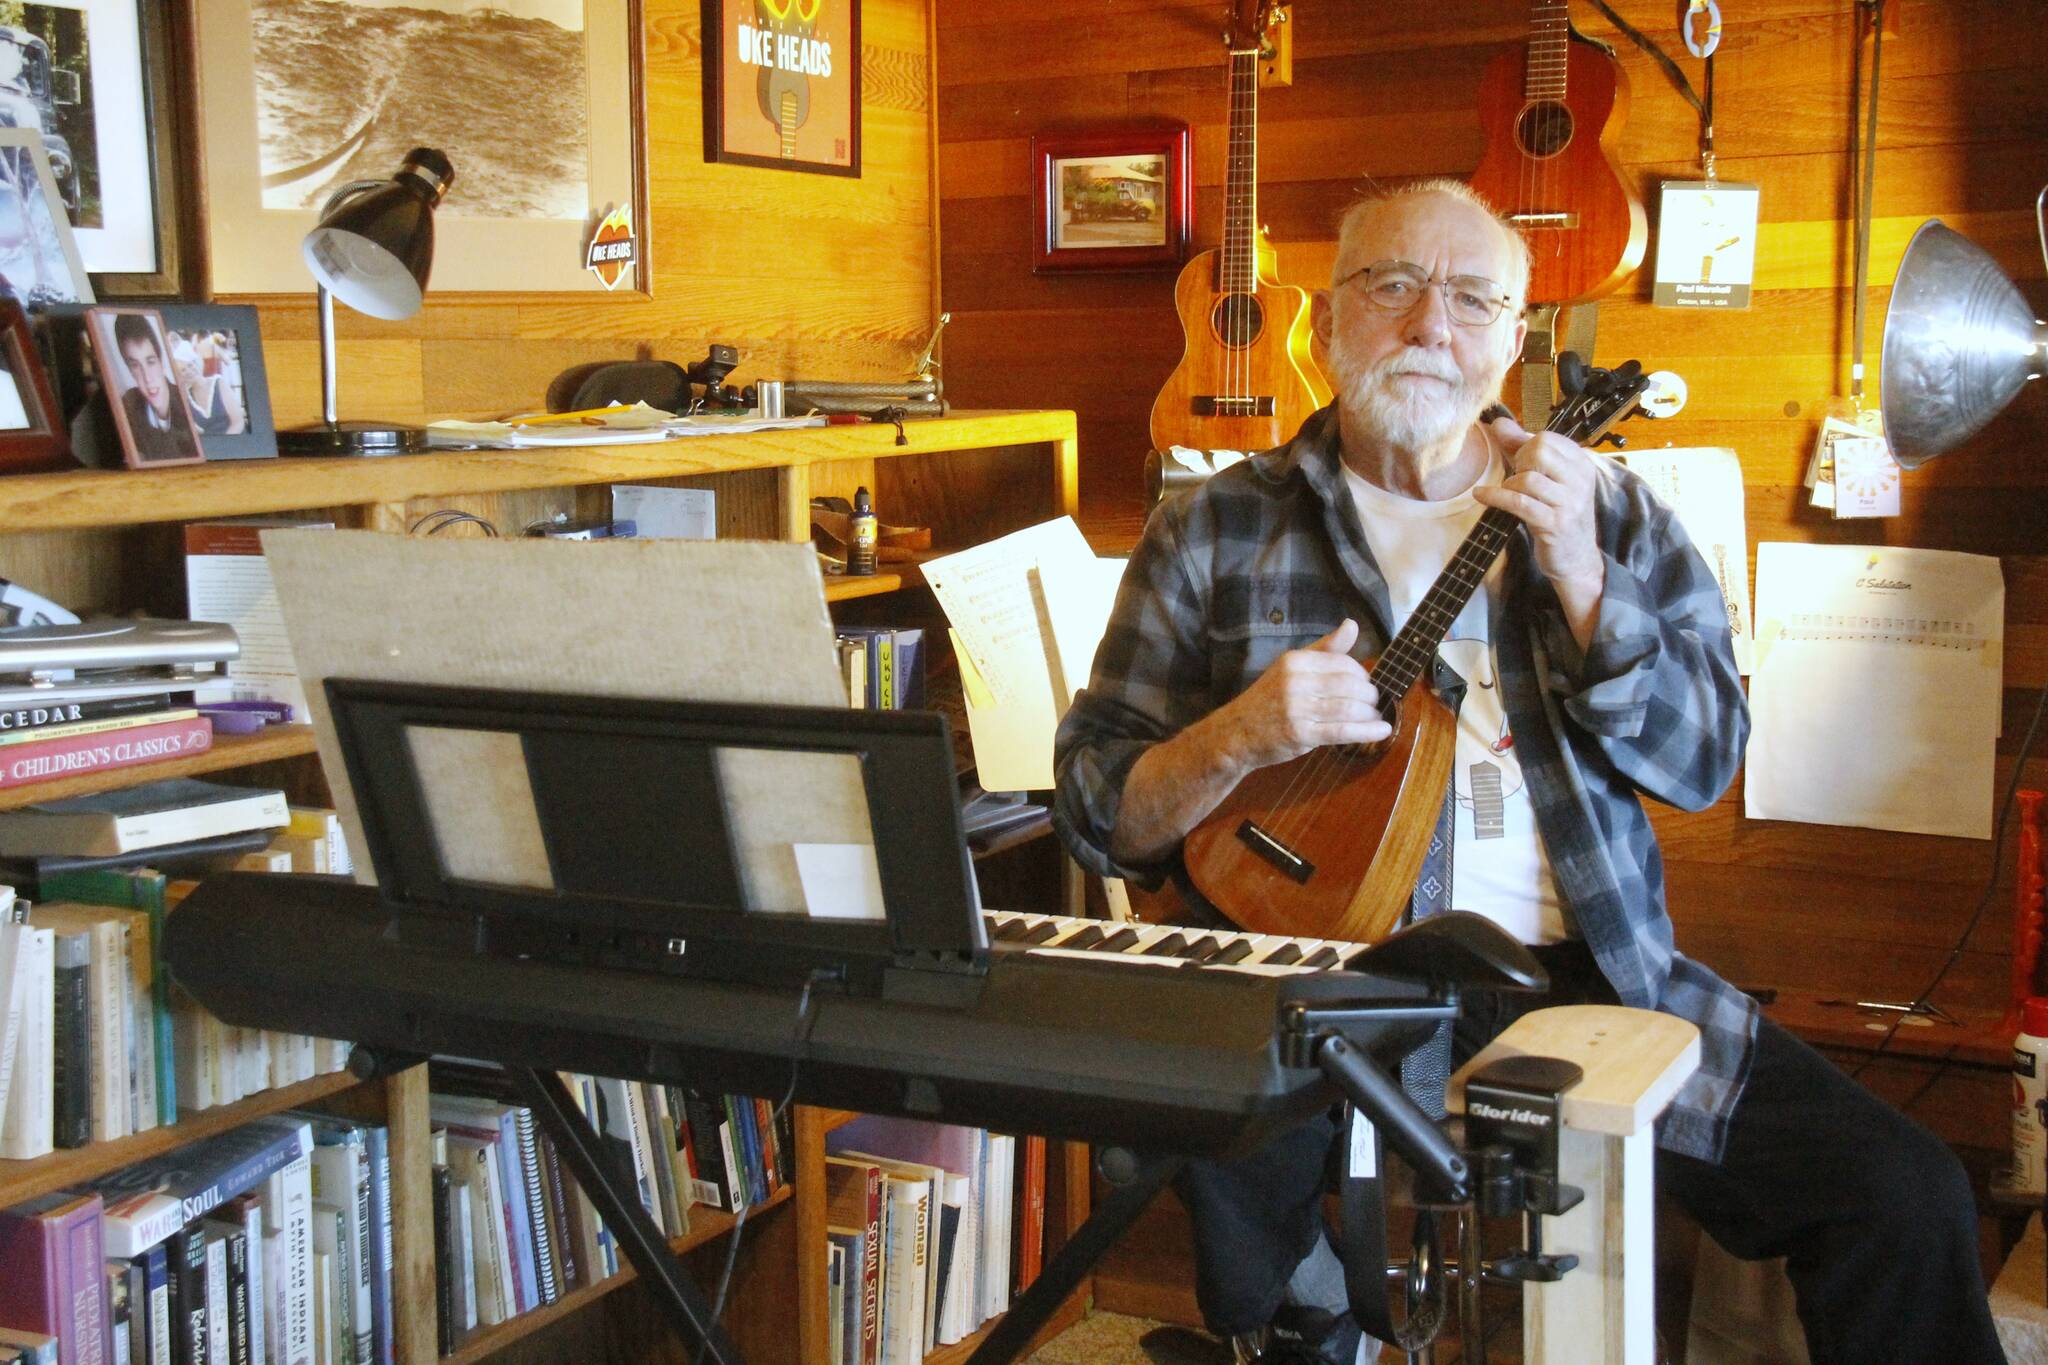 Photo by Kira Erickson/South Whidbey Record
Paul Marshall plays the ukulele in his studio. (Photo by Kira Erickson/South Whidbey Record)